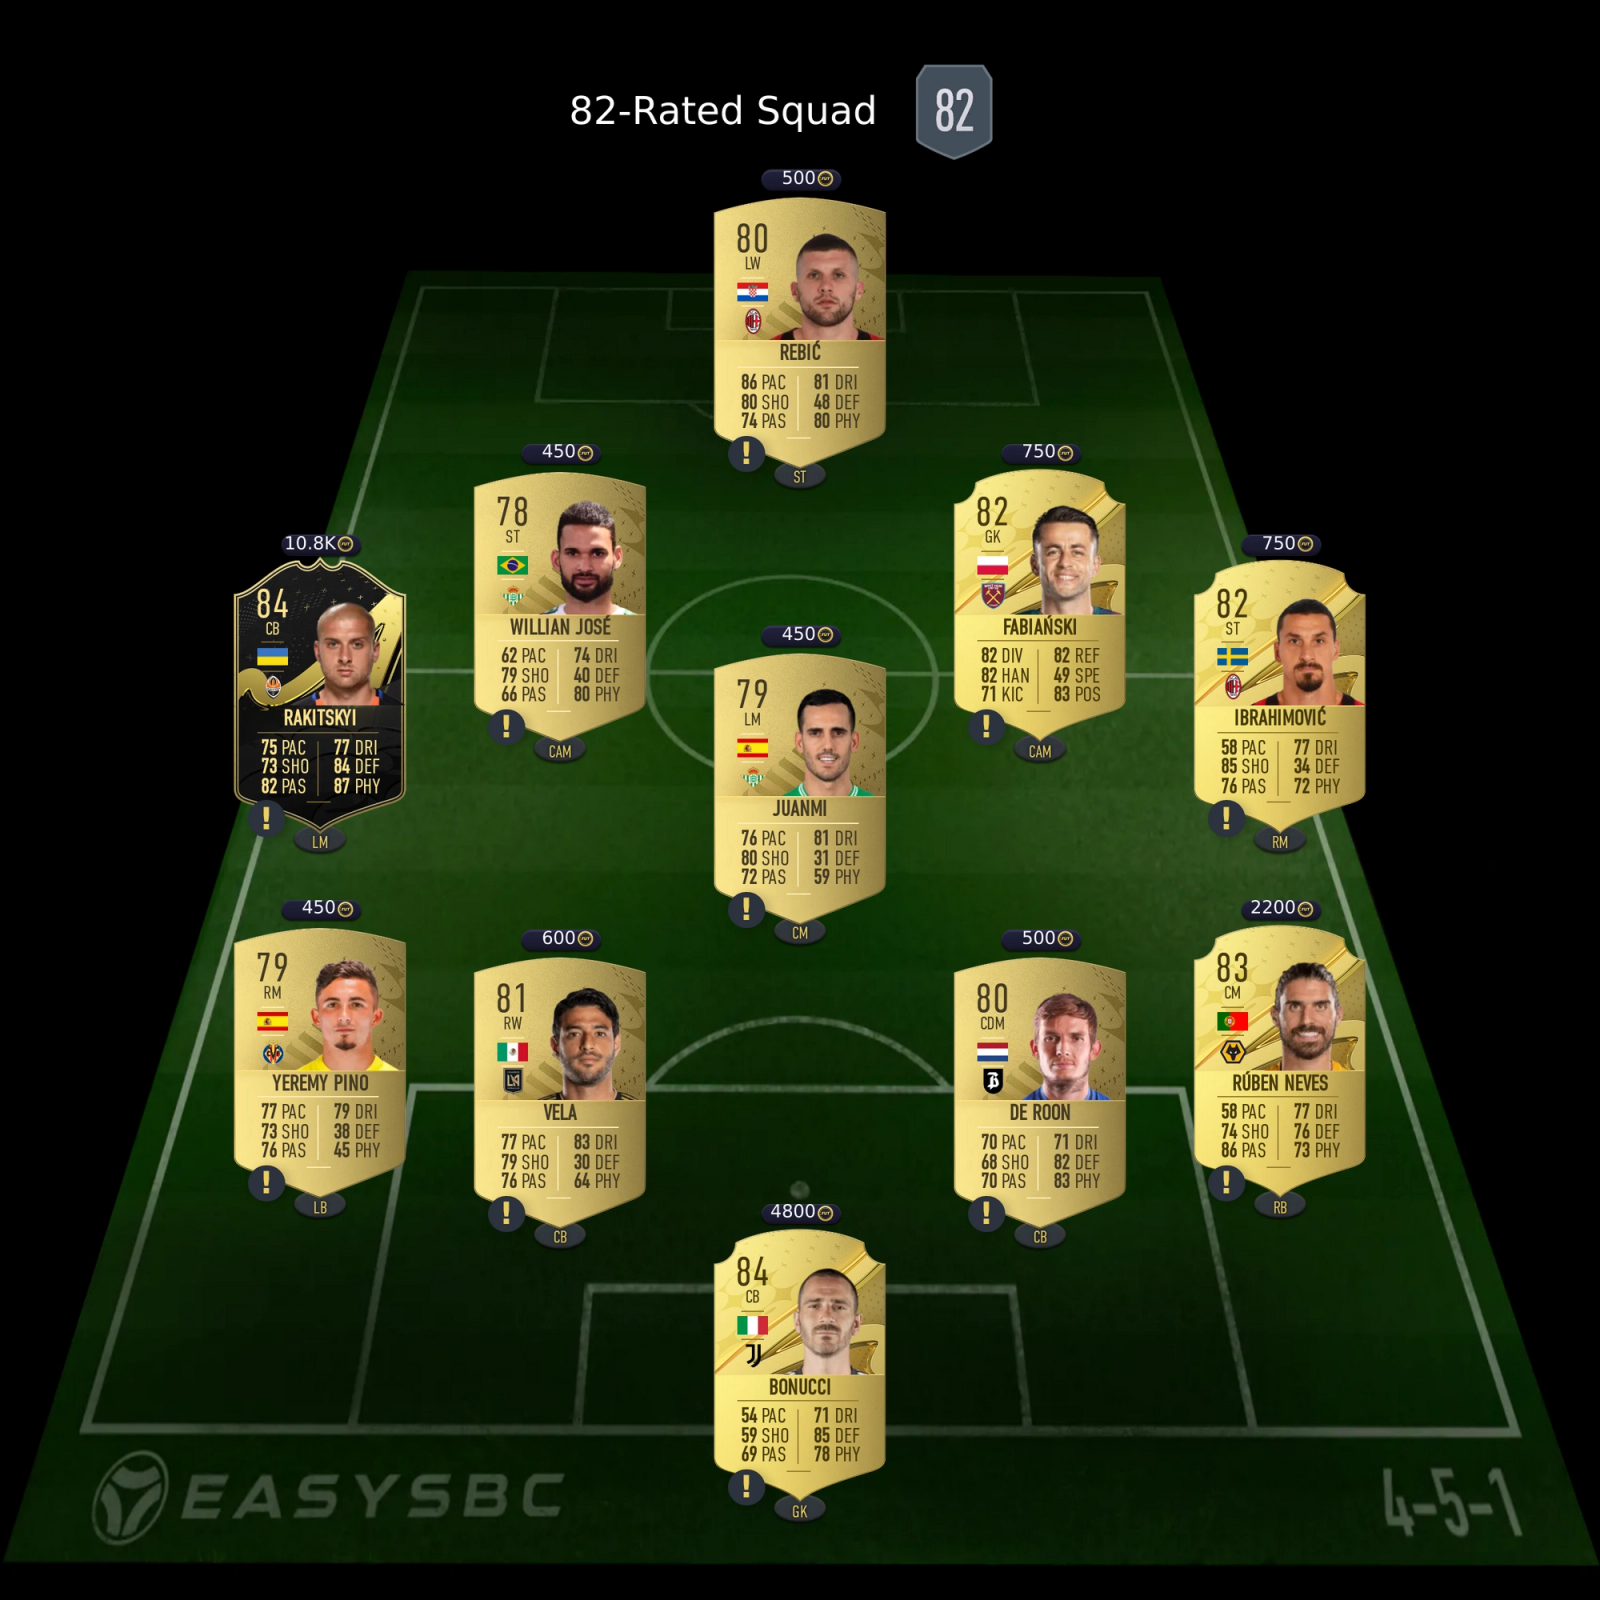 83+ x10 upgrade sbc solution 82-rated squad